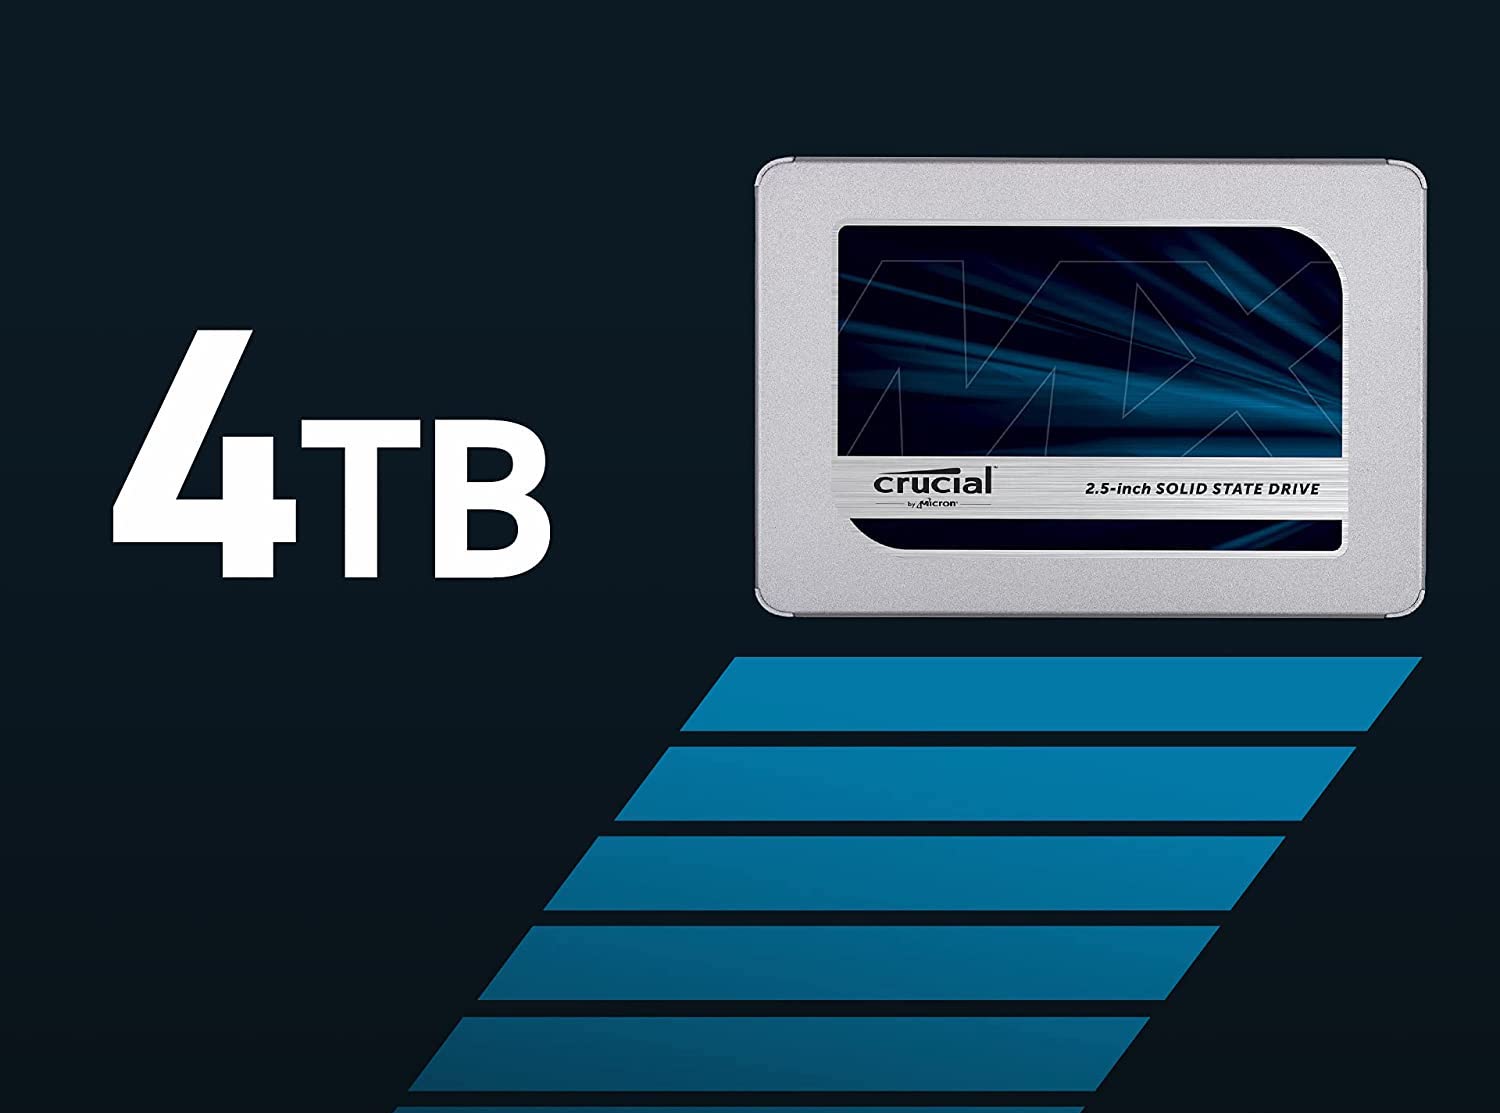 Crucial MX500 2.5-inch SATA SSD with 4TB drops to lowest price of